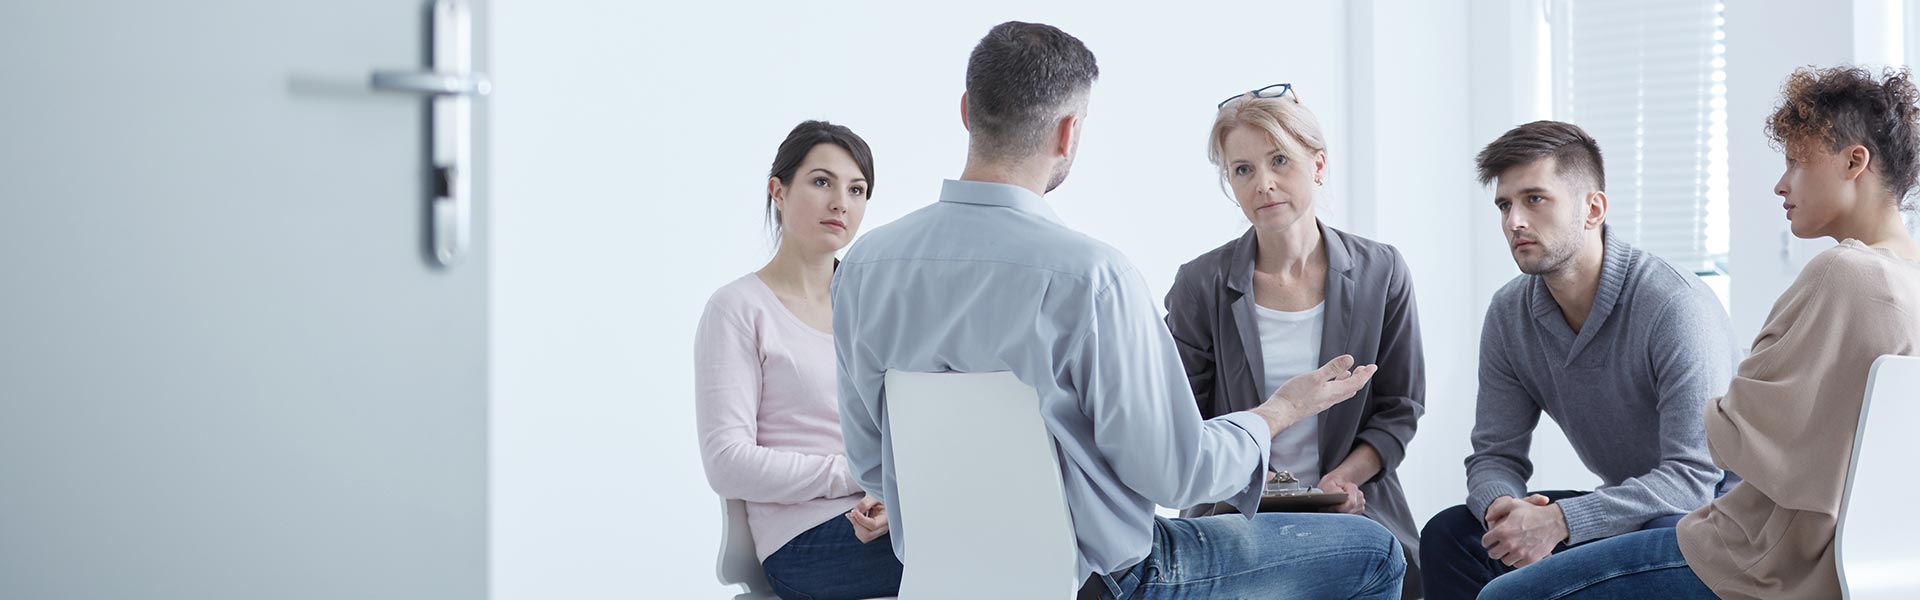 We offer highly professional
counseling and assessment services